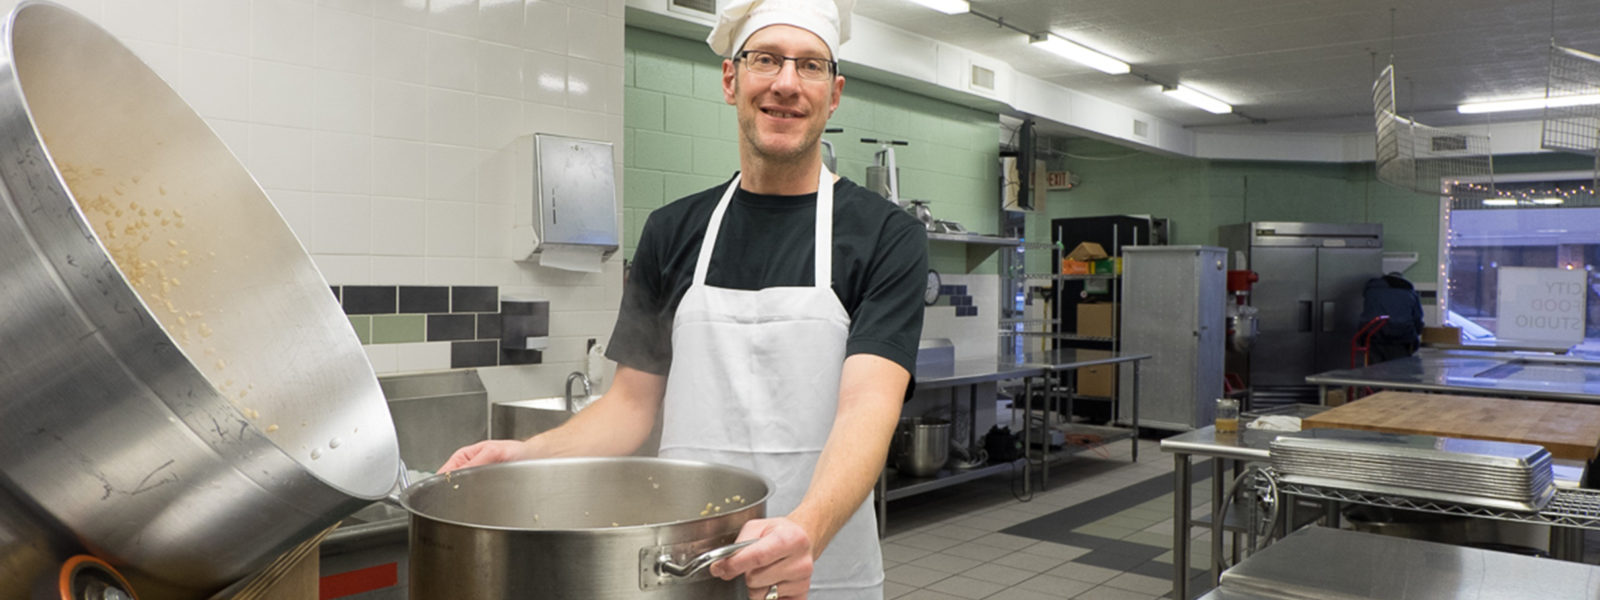 A photo of someone in a kitchen with a large pot